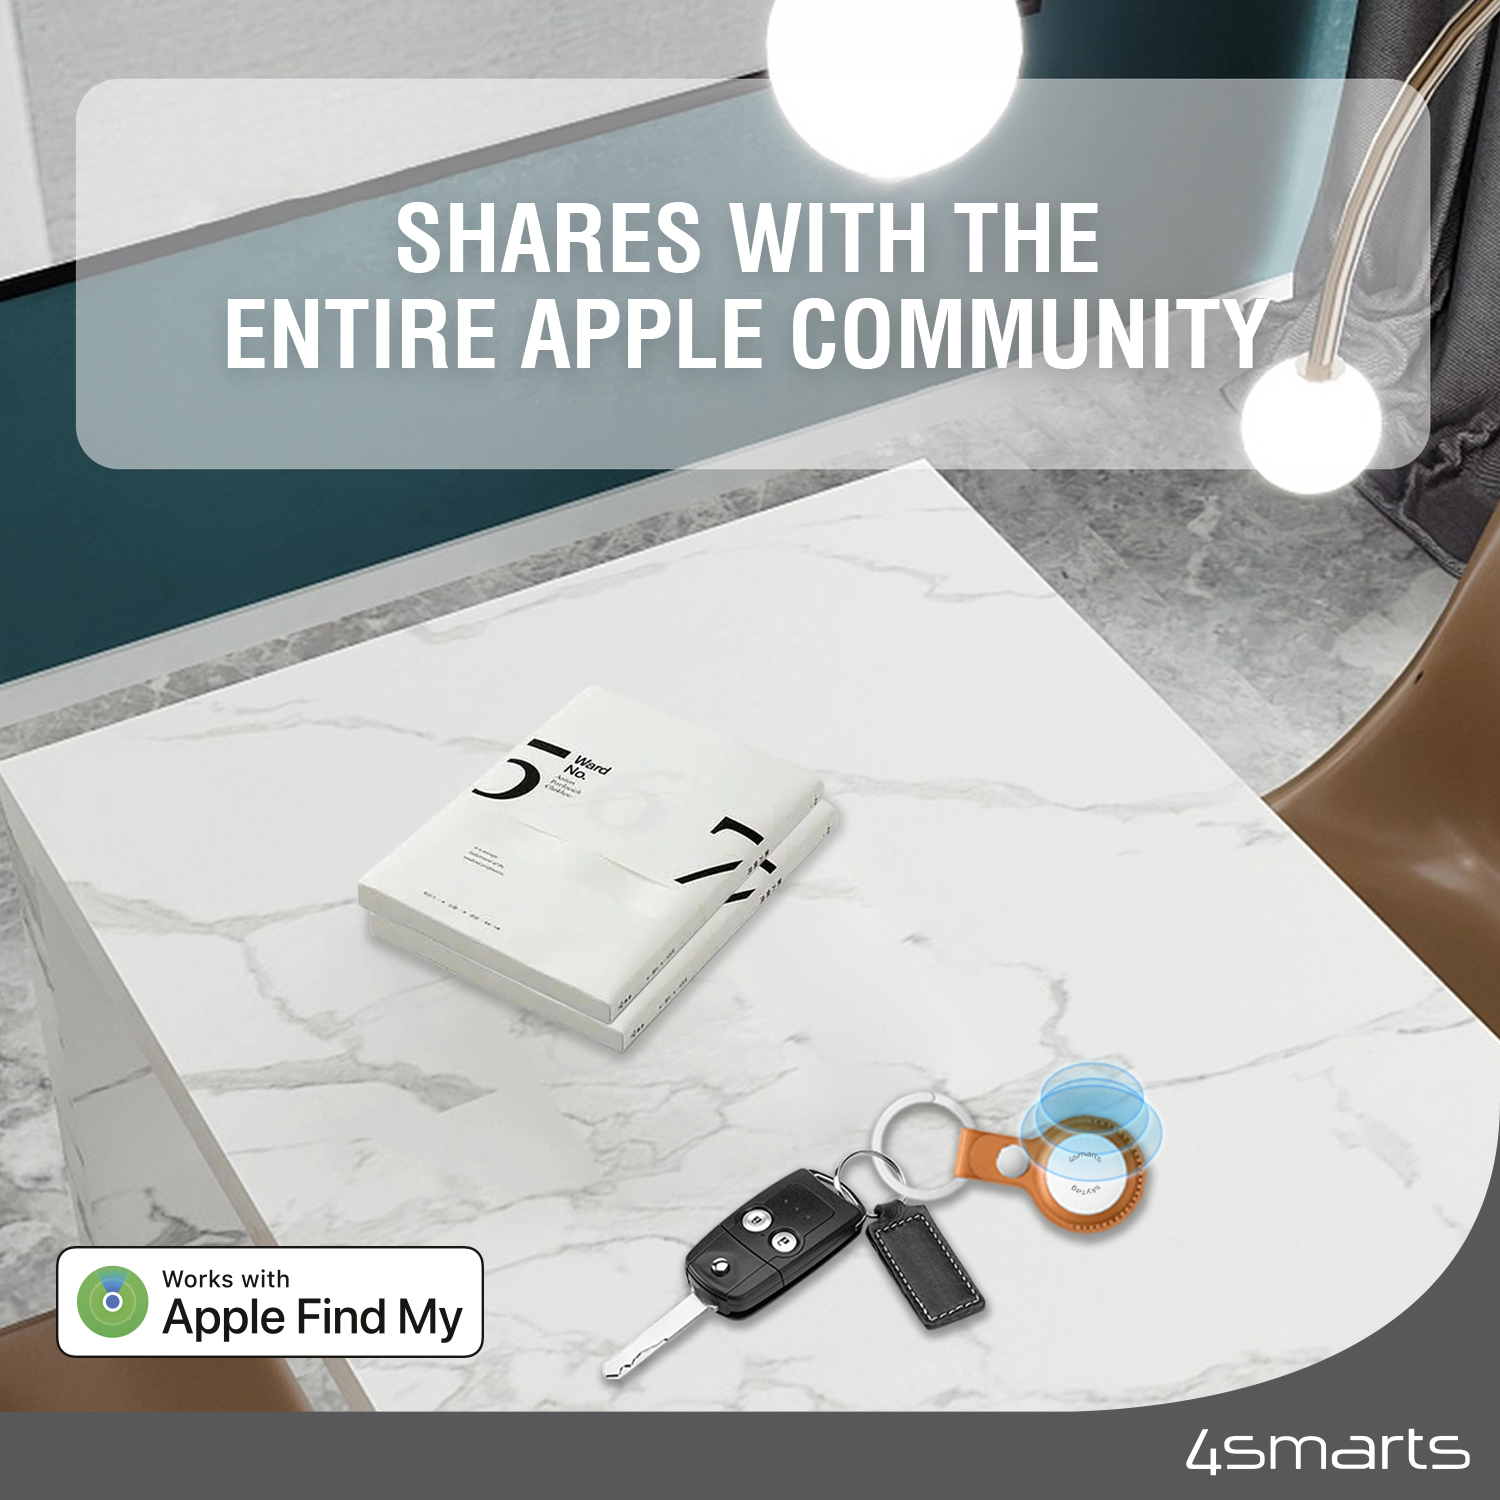 The 4smarts SkyTag Slim location finder is Apple Find My certified, which means you can communicate with the entire Apple community.